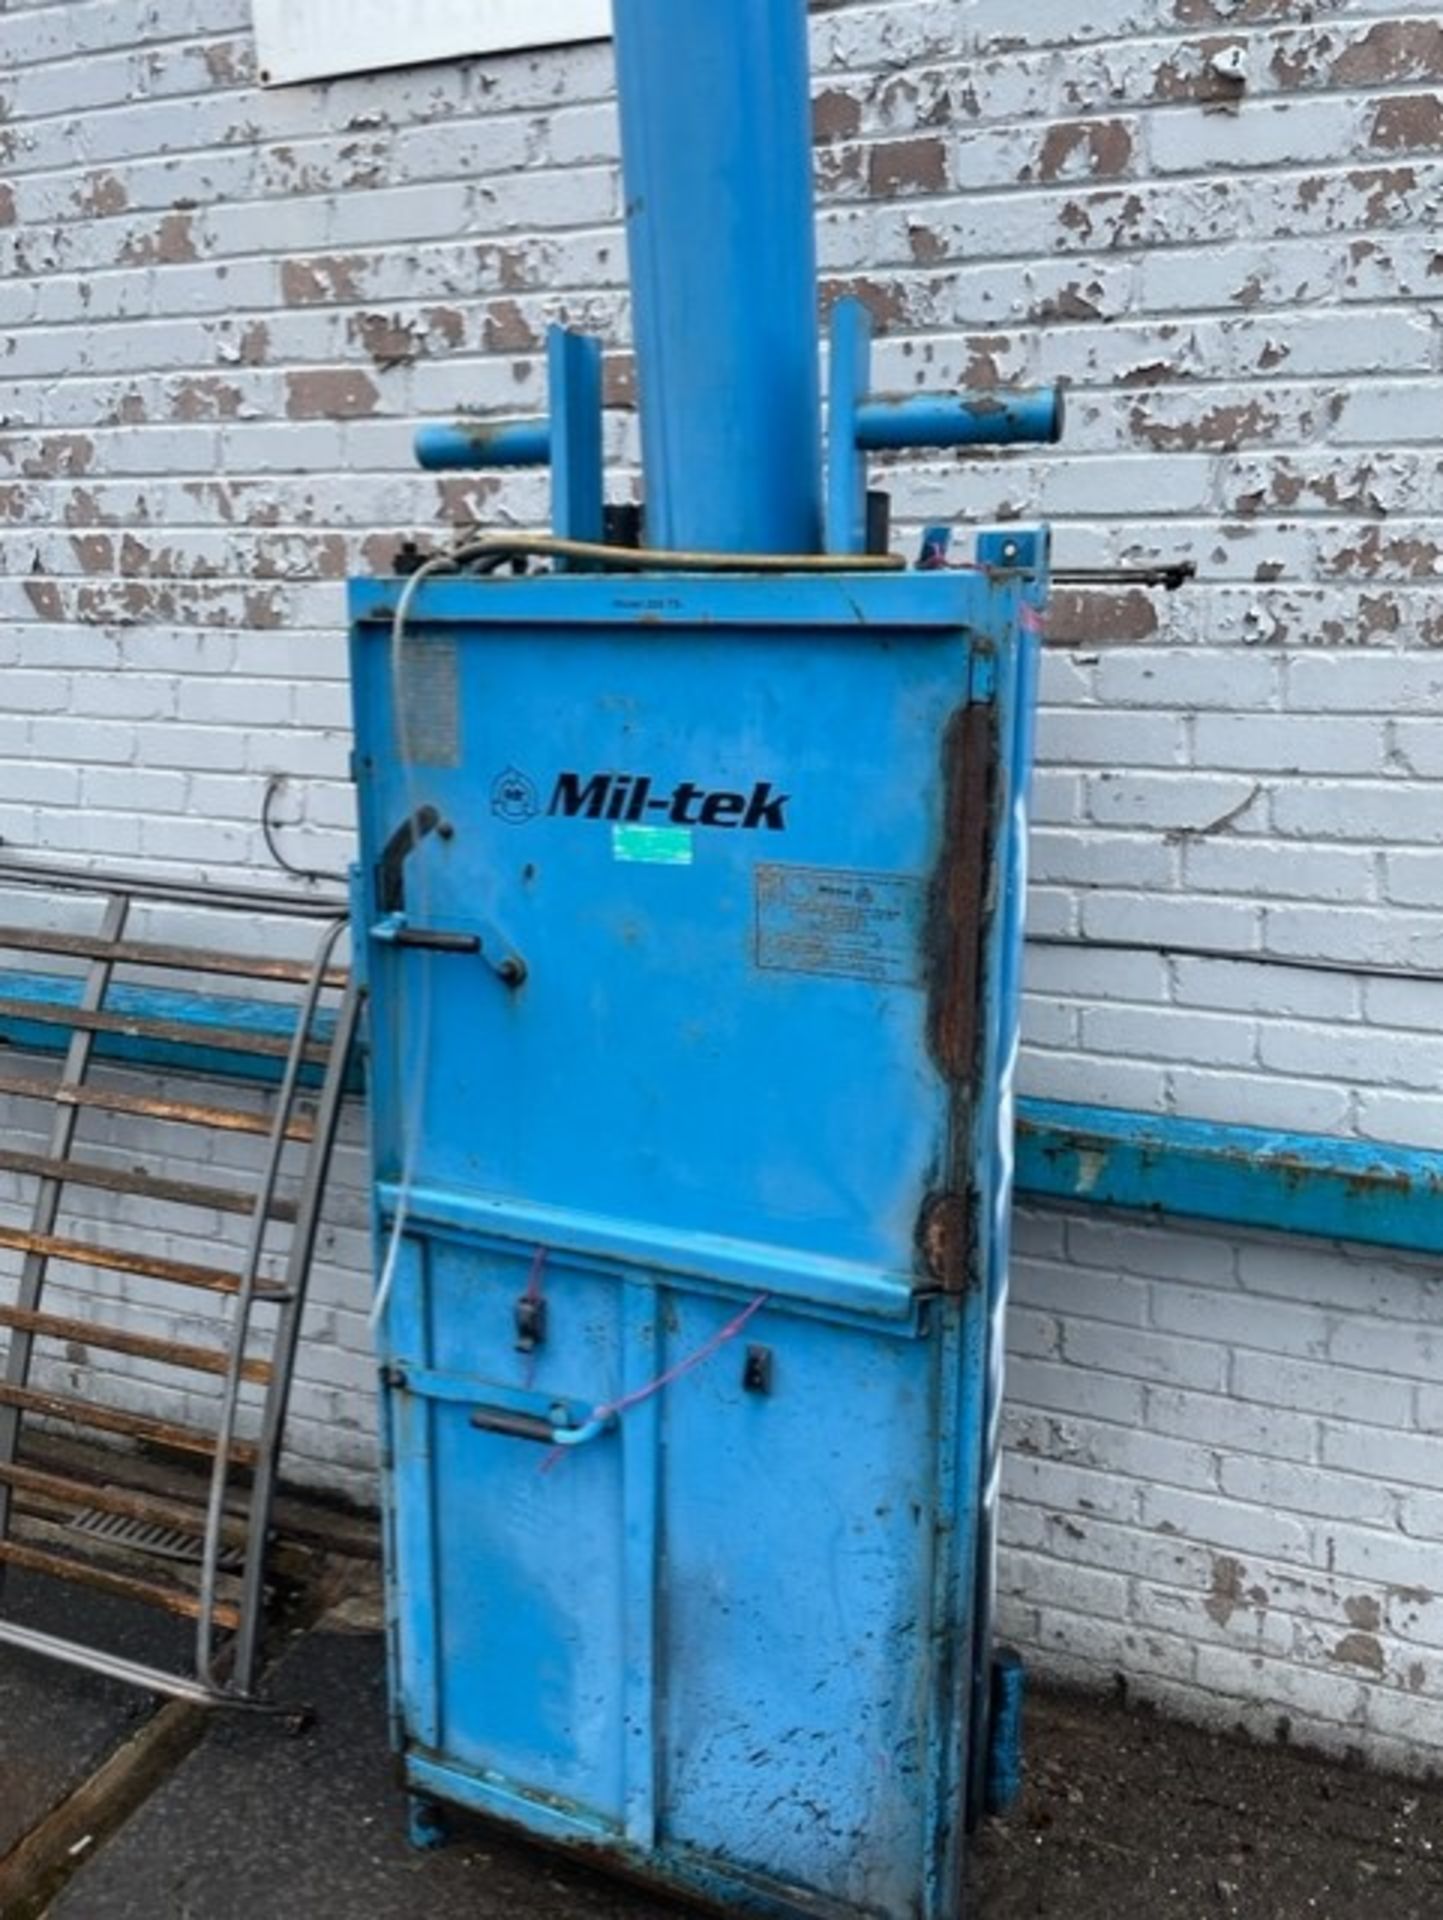 Old miltek baler for cardboard and plastics in bits all there though no reserve